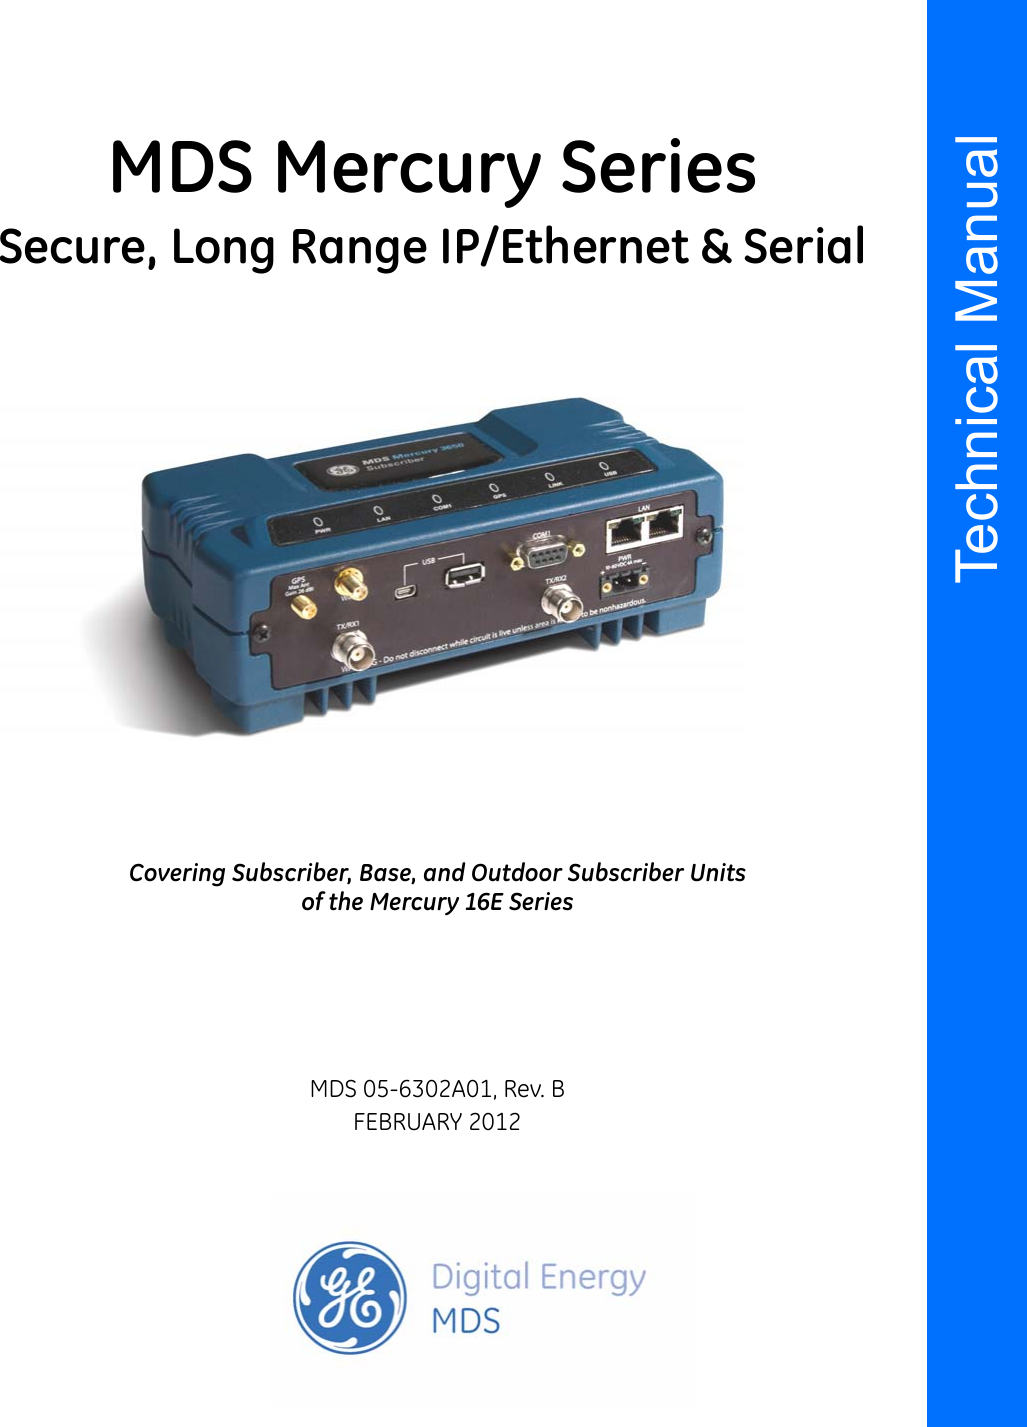 Installation and Operation GuideTechnical ManualMDS 05-6302A01, Rev. BFEBRUARY 2012Covering Subscriber, Base, and Outdoor Subscriber Unitsof the Mercury 16E SeriesMDS Mercury SeriesSecure, Long Range IP/Ethernet &amp; Serial